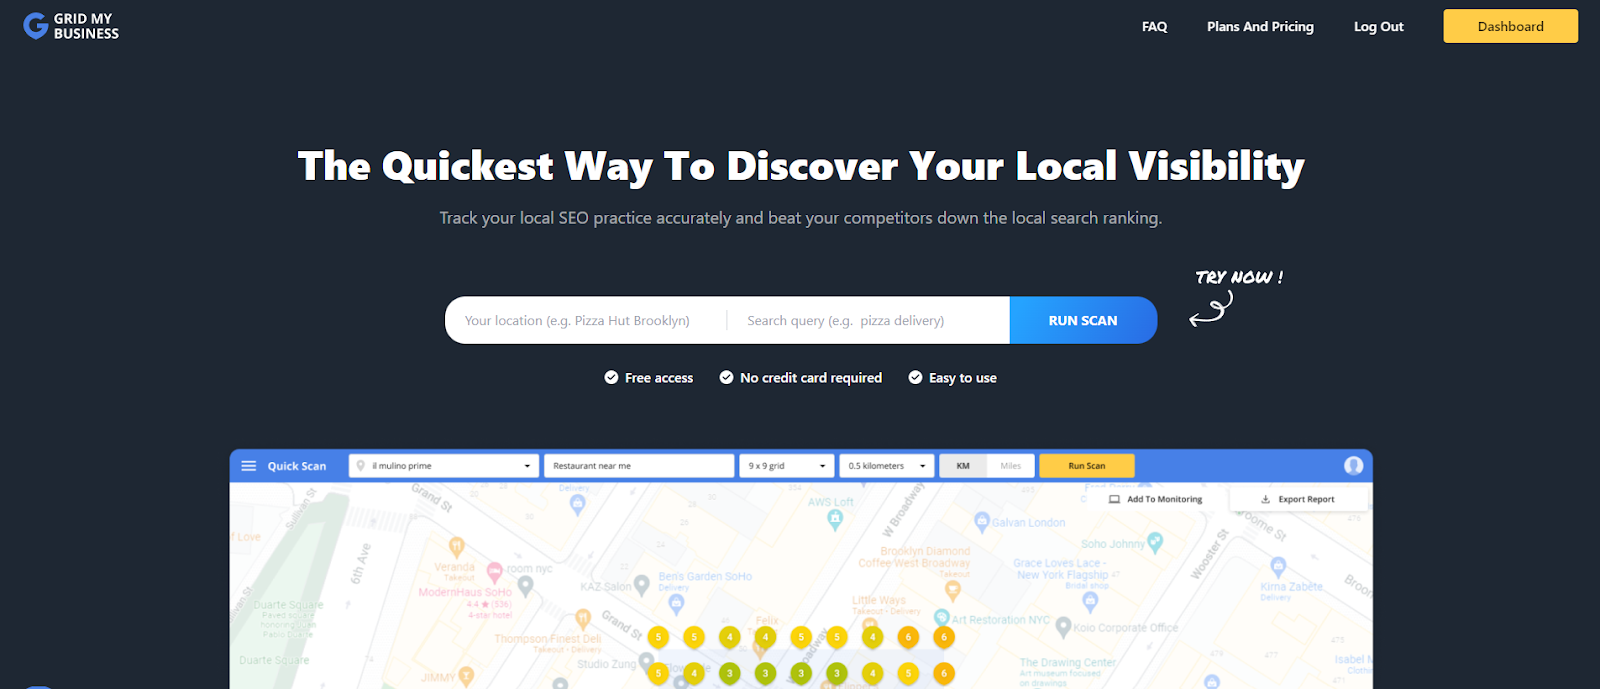 Grid My Business is one famous Rank tracker for Local SEO